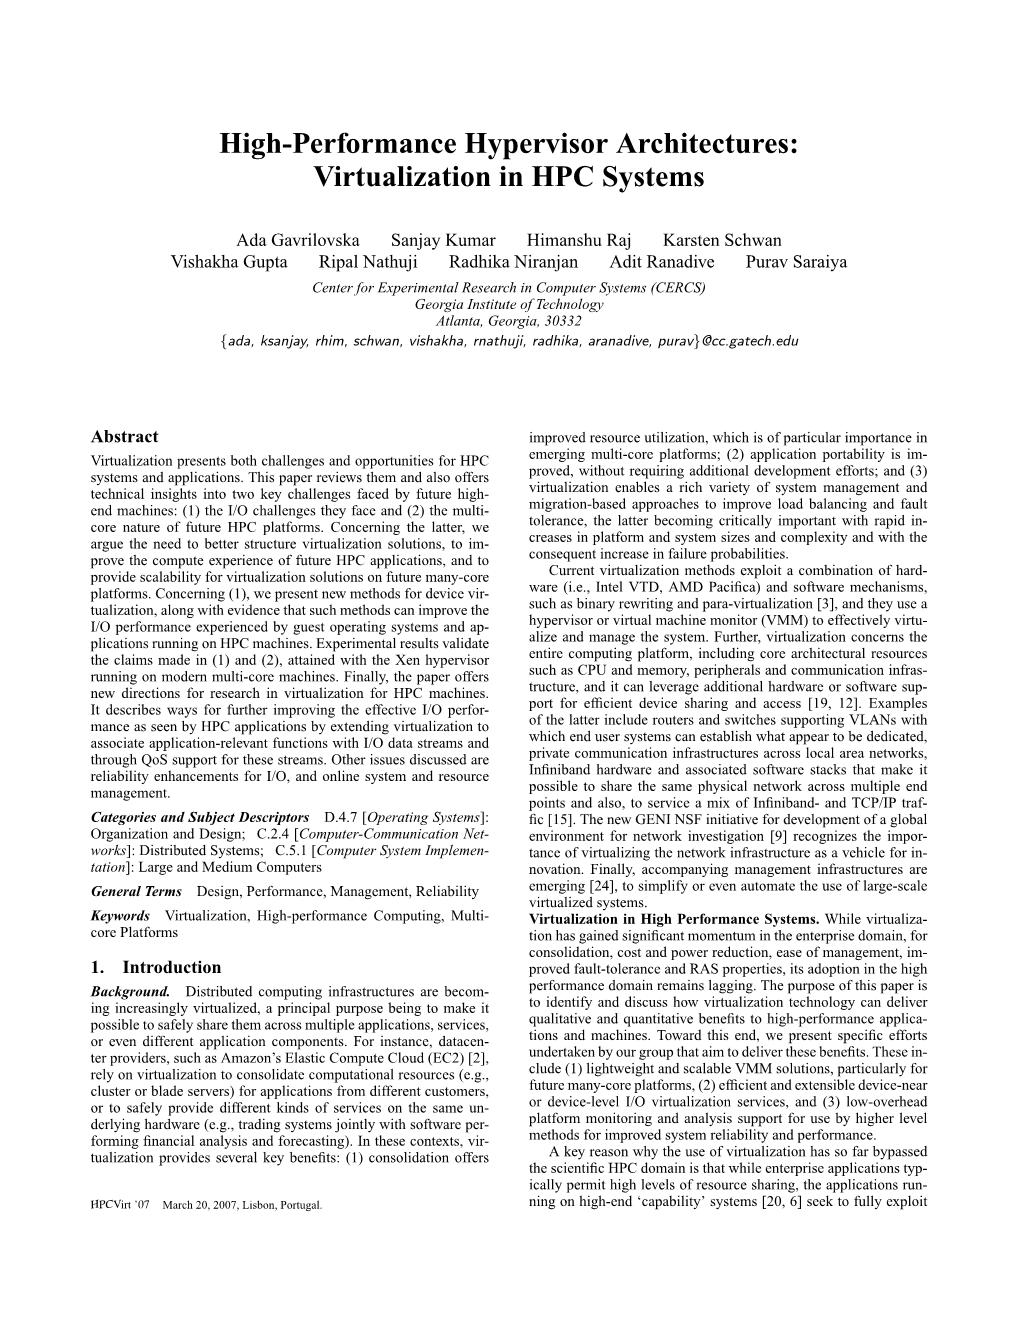 Virtualization in HPC Systems